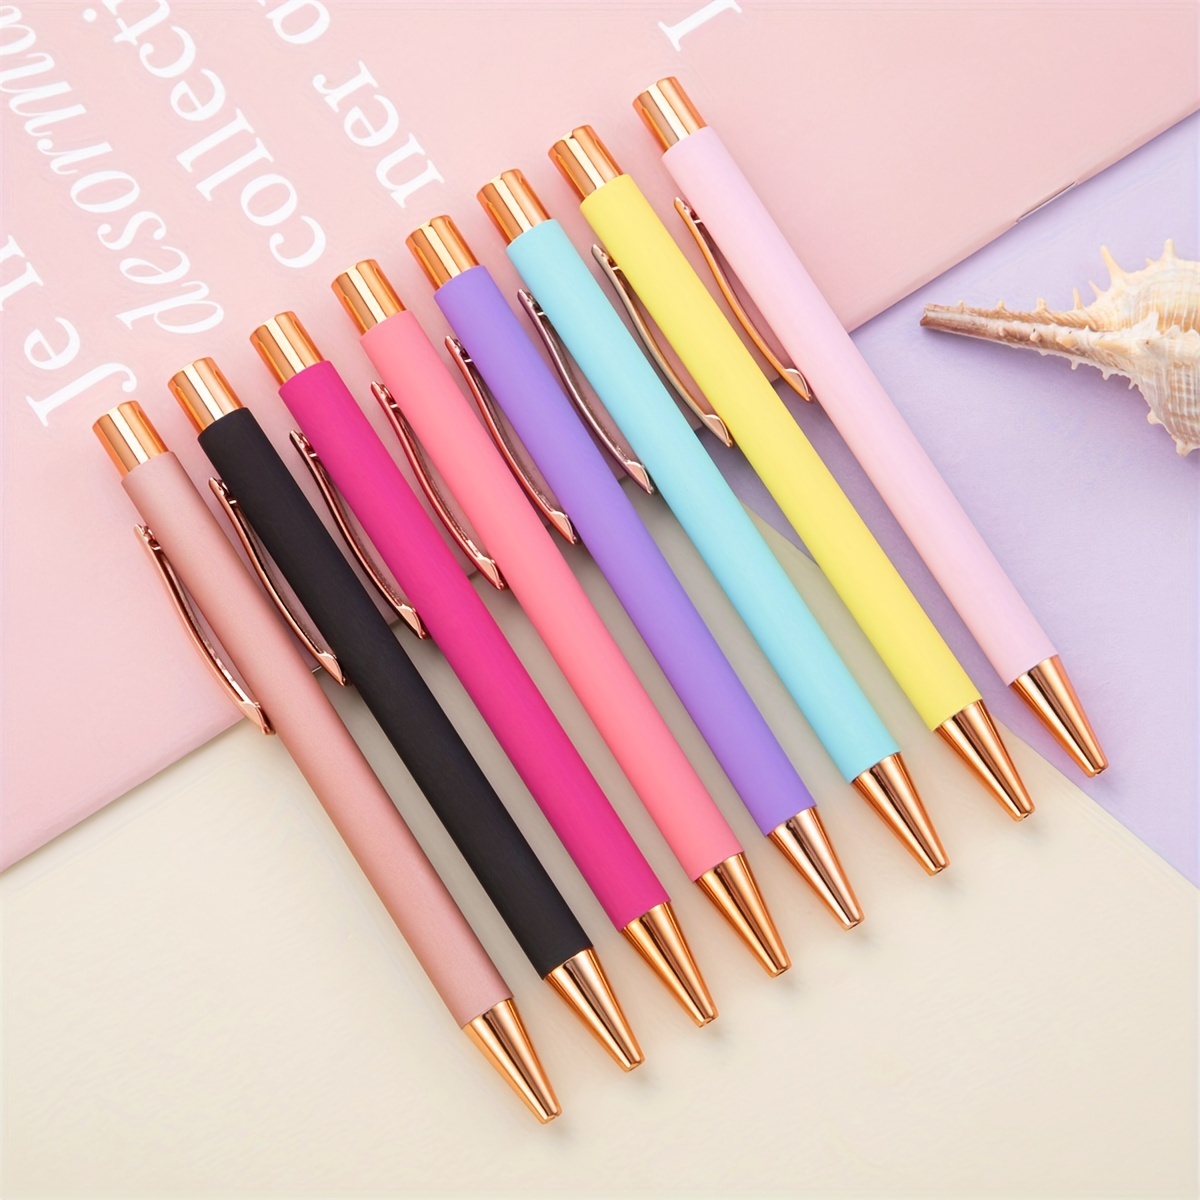  7 Pcs Fancy Pens for Women Cute Pens Sparkly Glitter Pens with  10 Pcs Black Ink Refills Pretty Pen Gifts Journaling Pens for Girls Office  School Christmas Appreciation Gifts (Pink,Cute) 